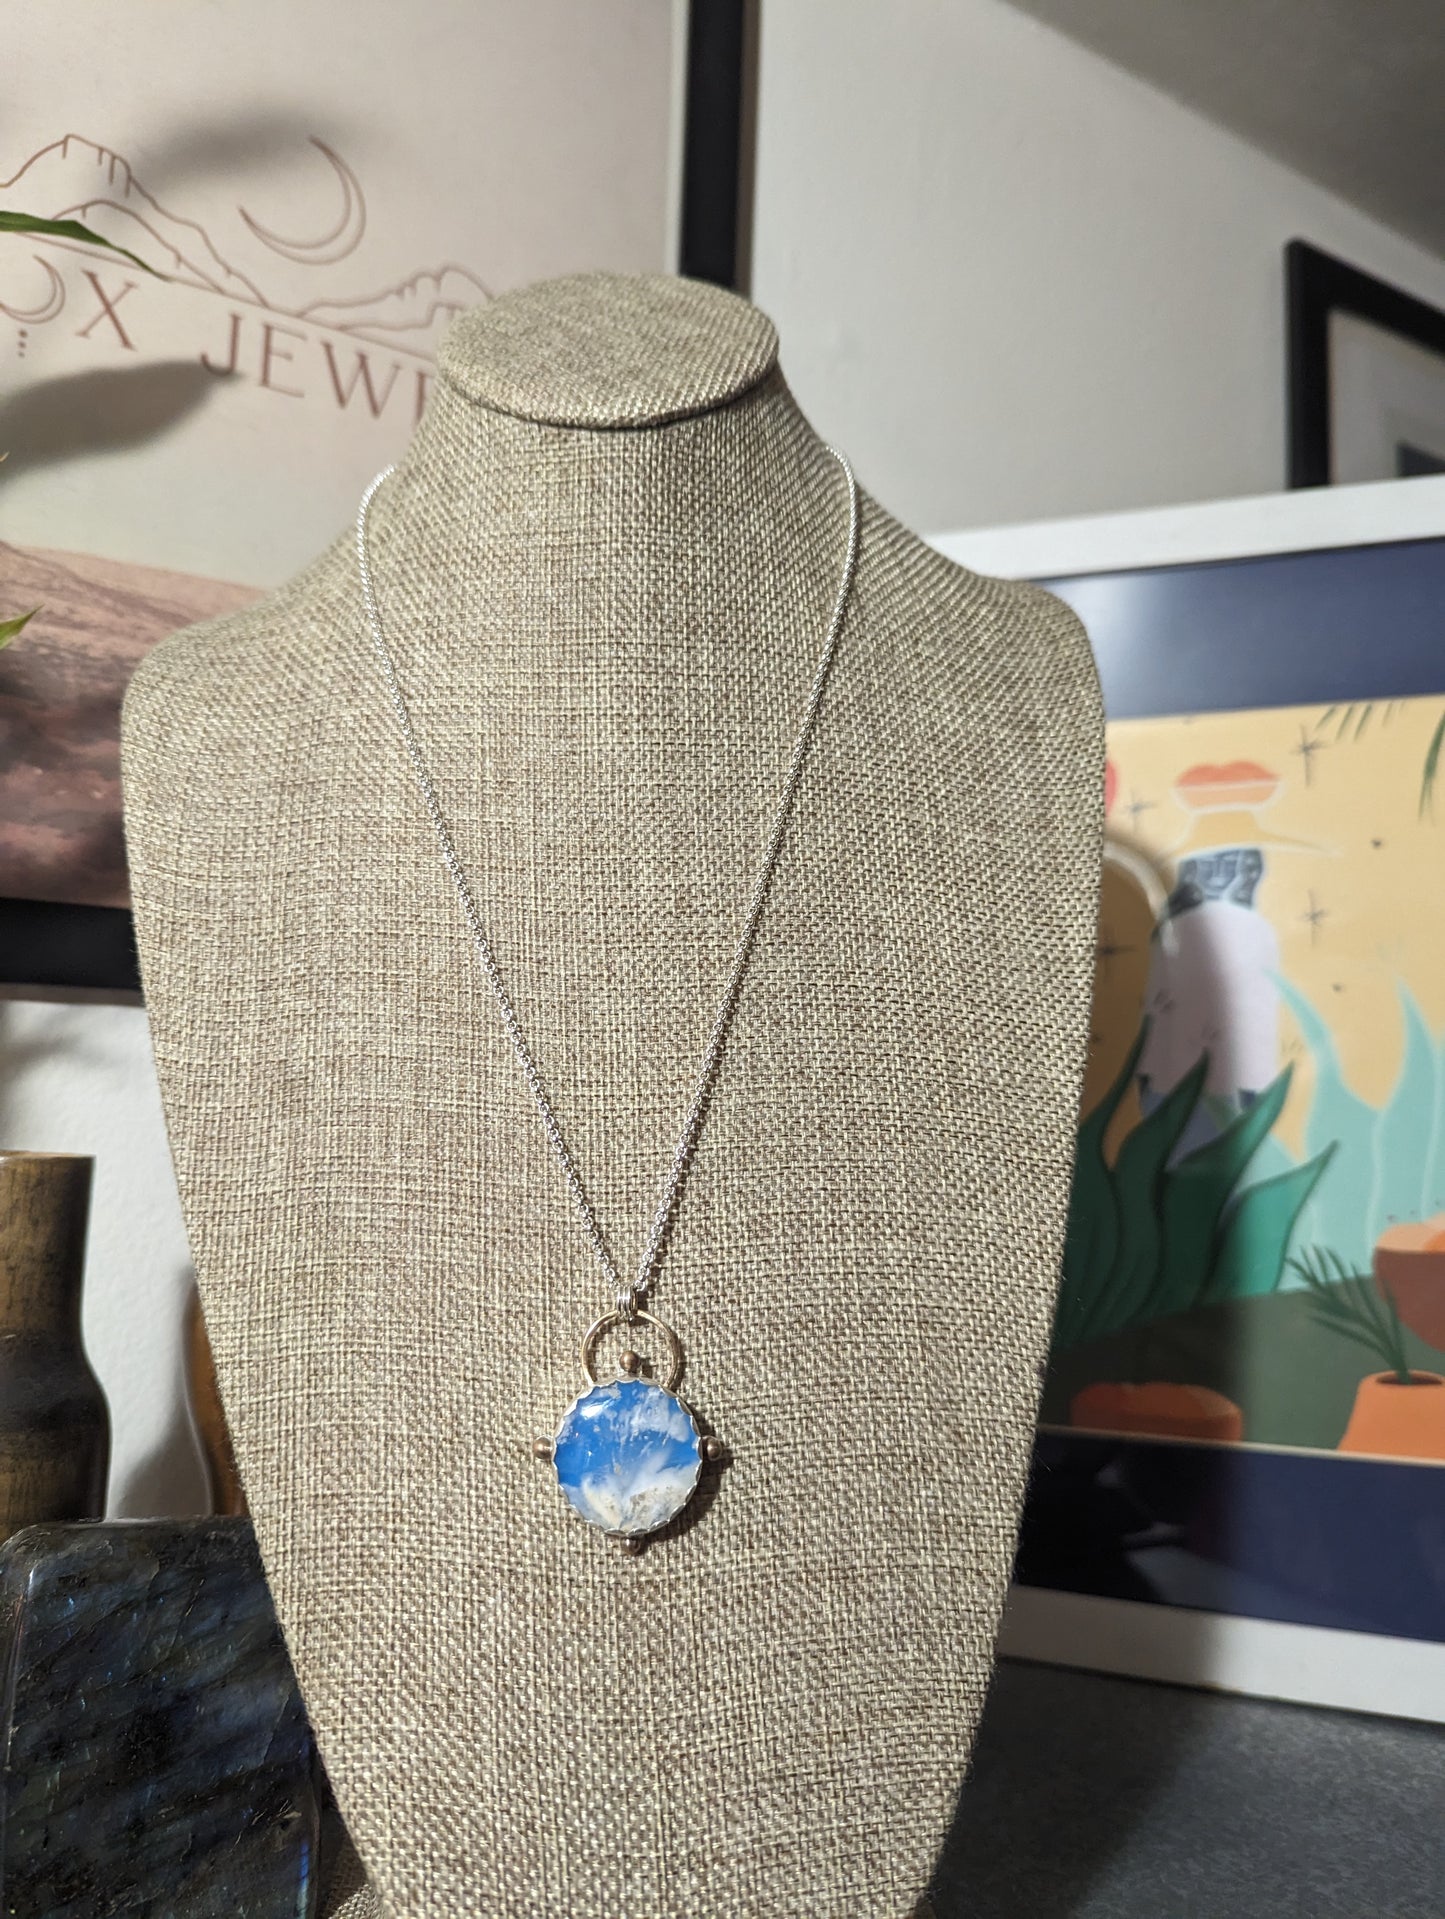 Blue Sky Compass Sterling Silver Necklace (MTO)